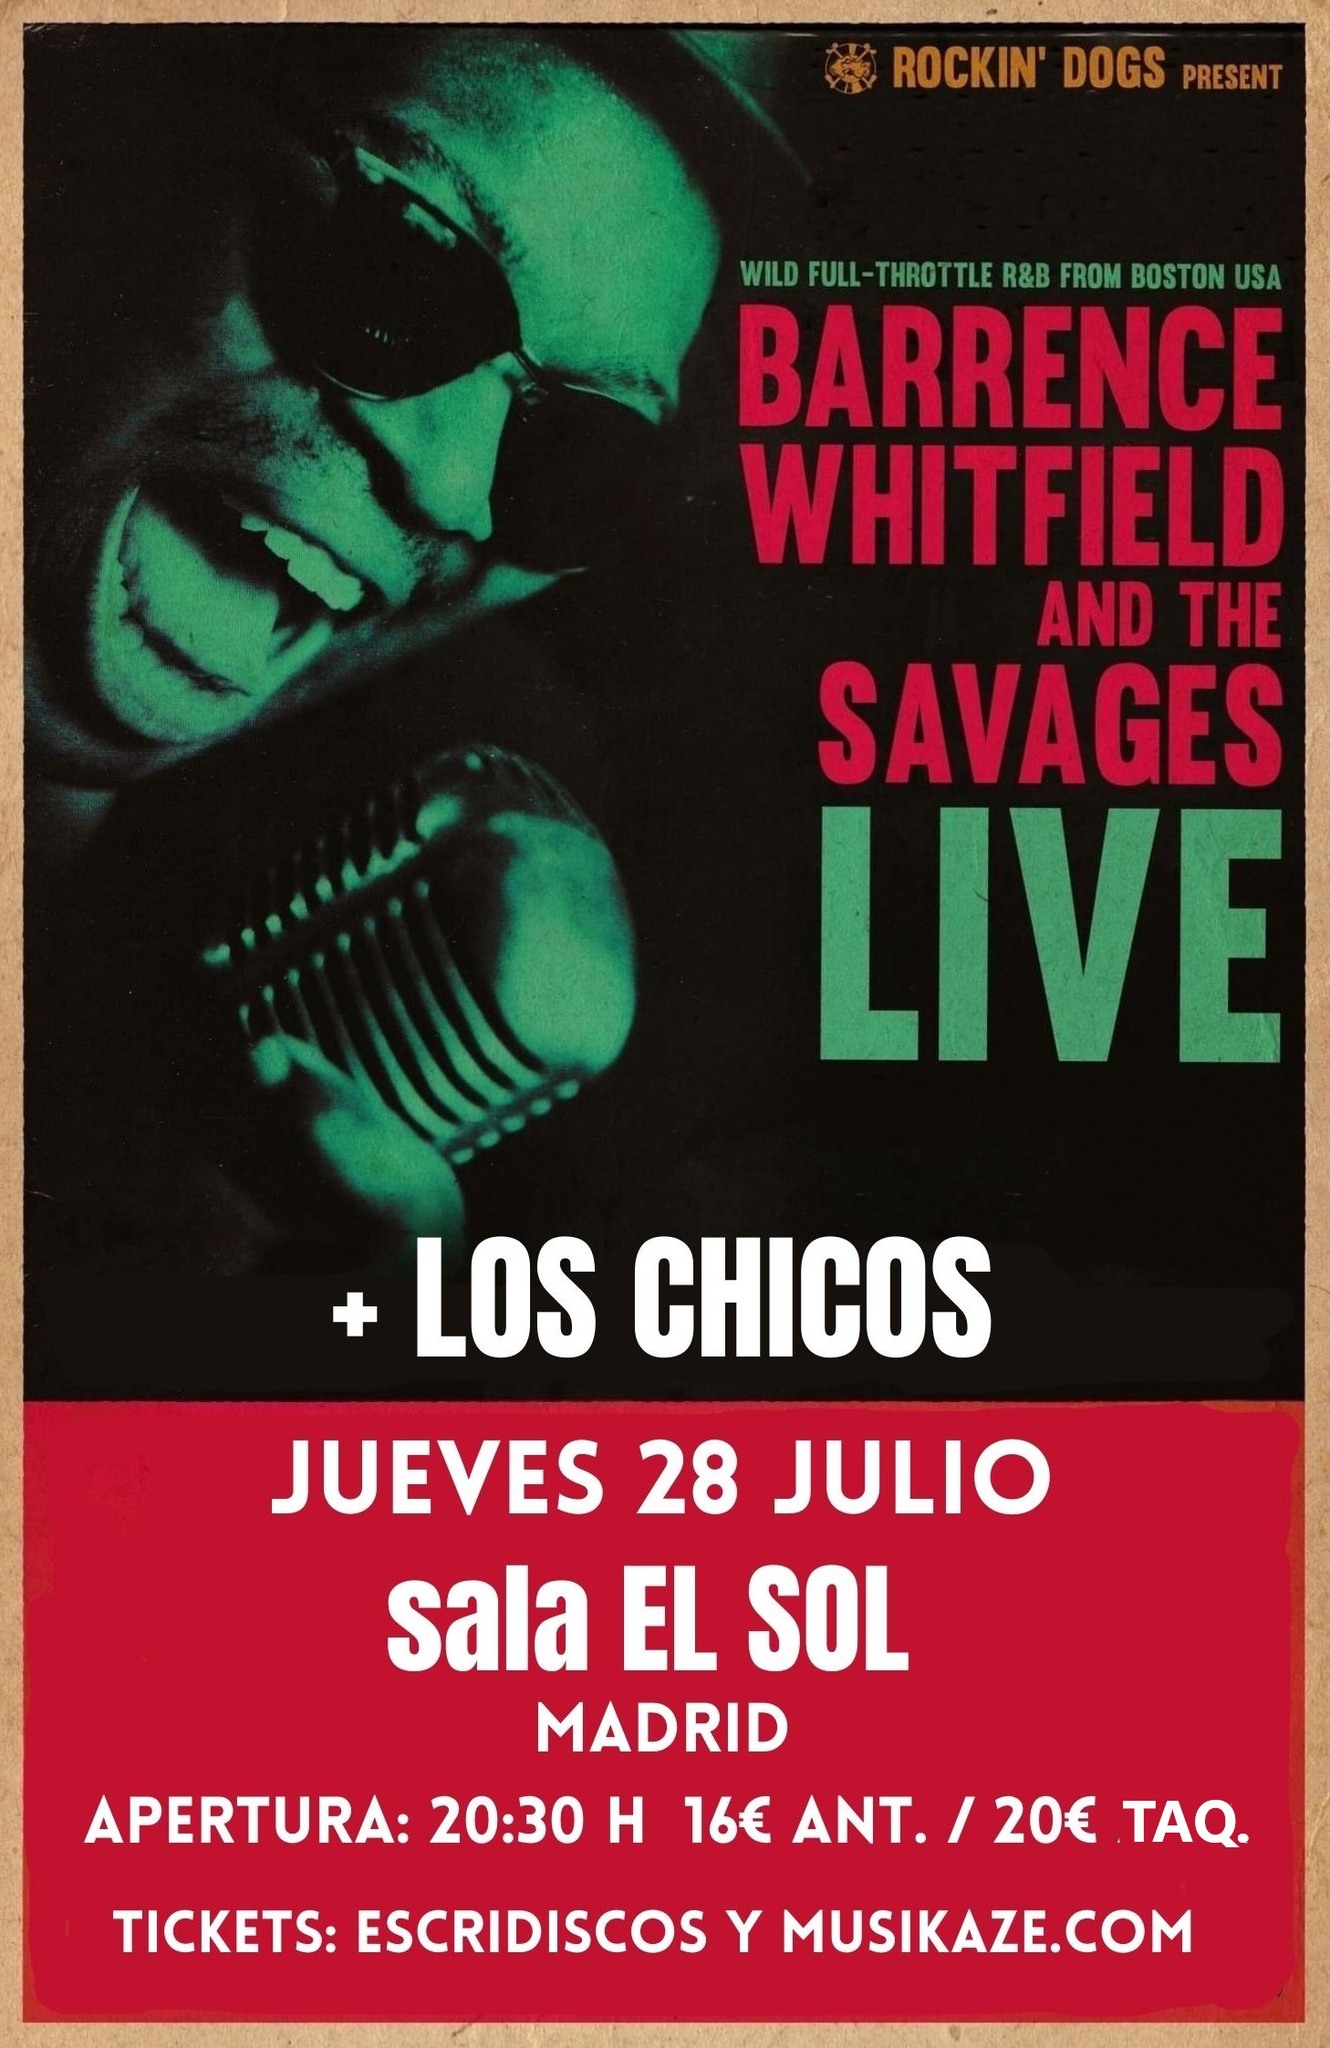 BARRENCE WHITFIELD & THE SAVAGES + Los Chicos en Madrid - Mutick